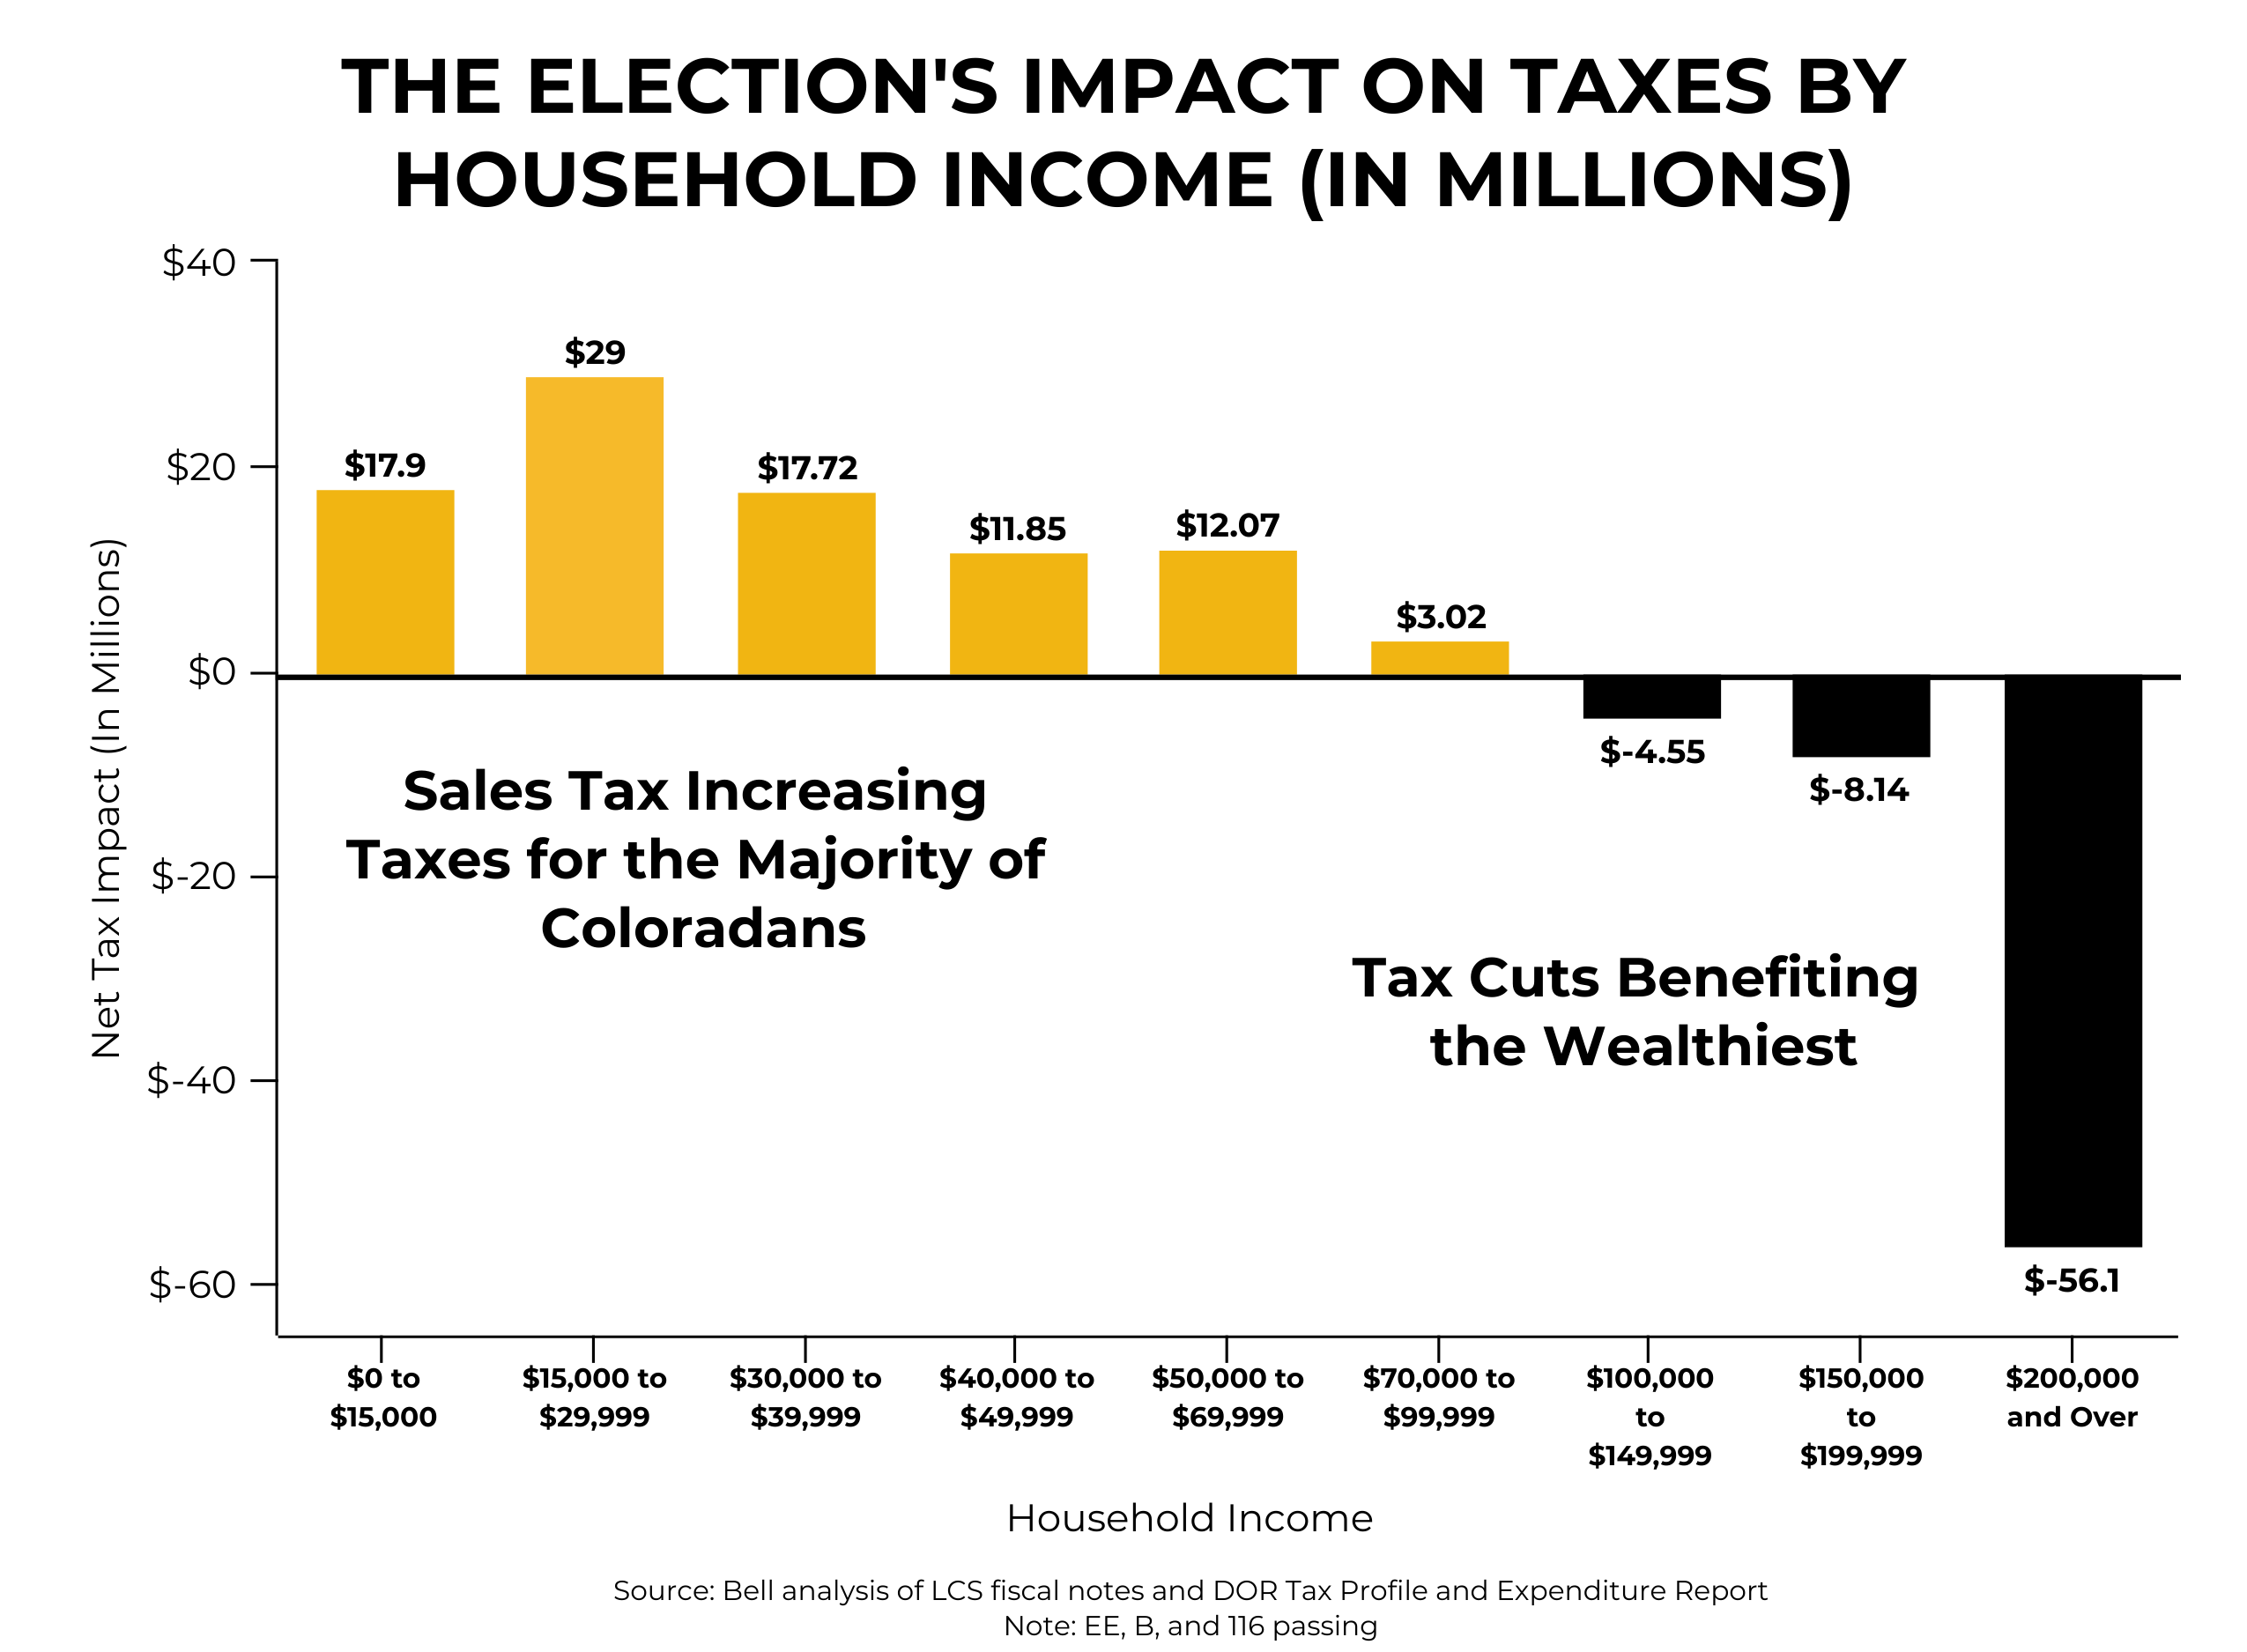 Graph in black and yellow showing election's impact on taxes based on household income.